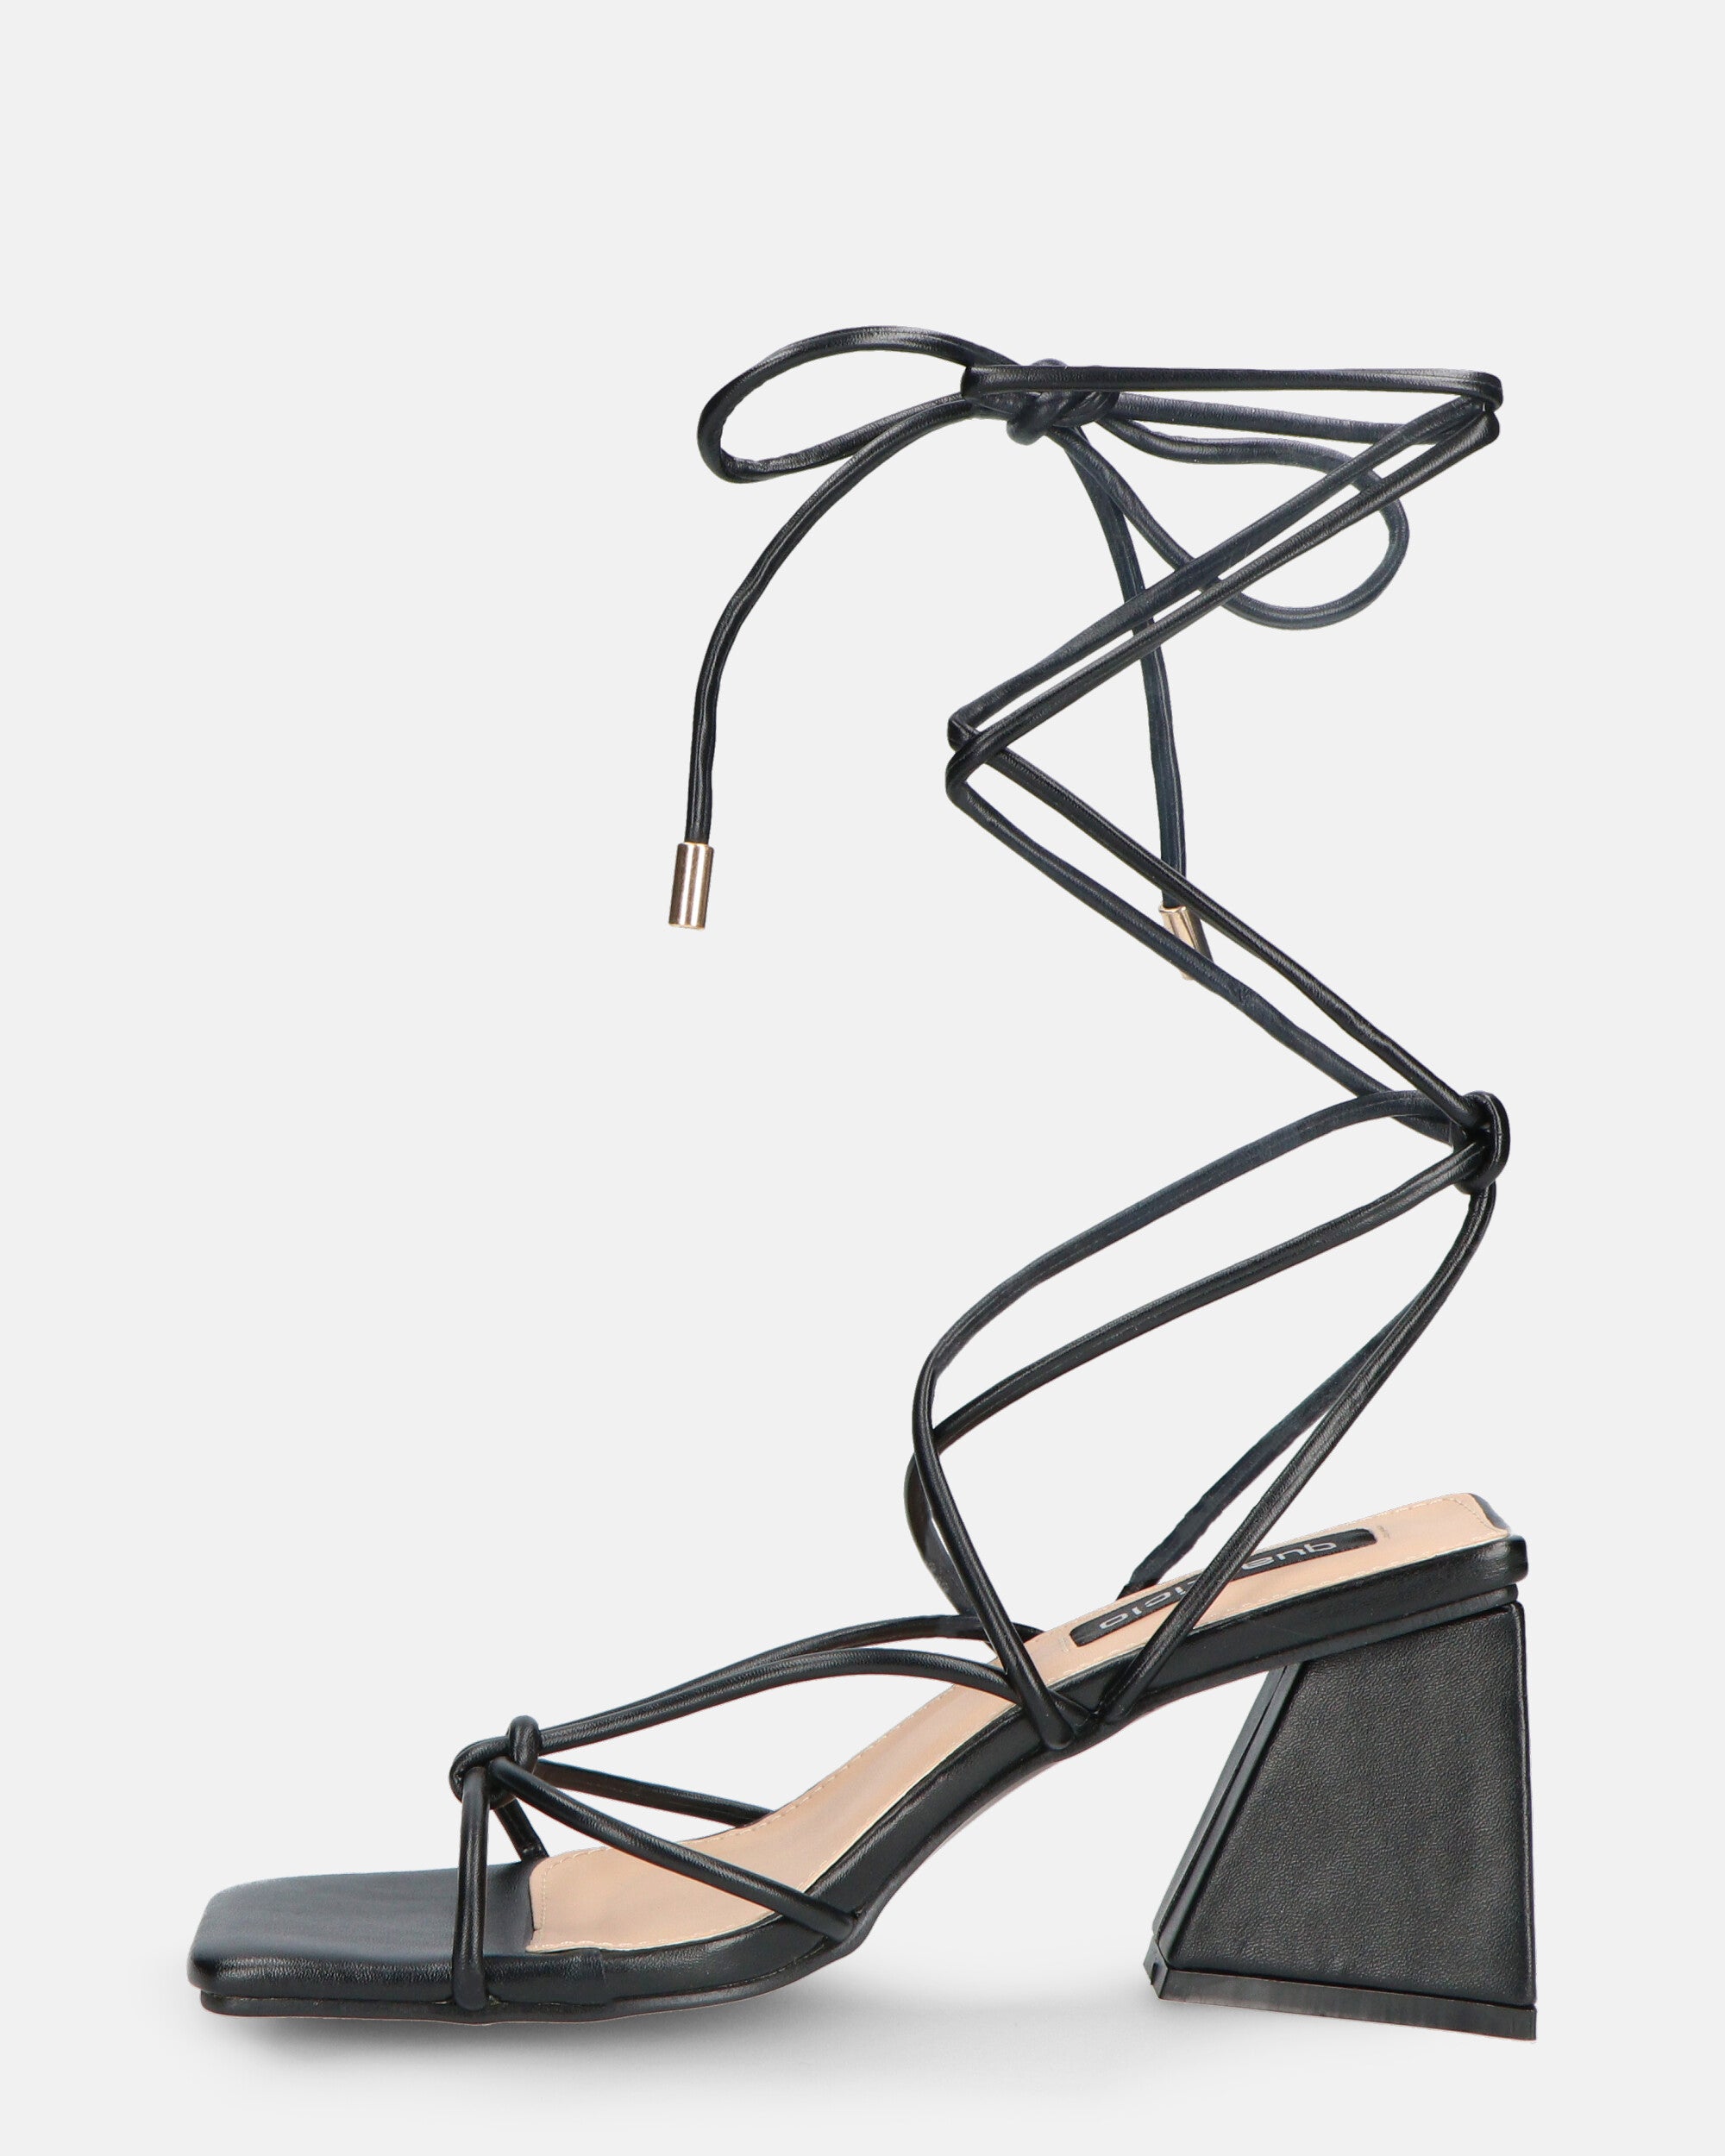 MELISA - sandals with laces in black PU